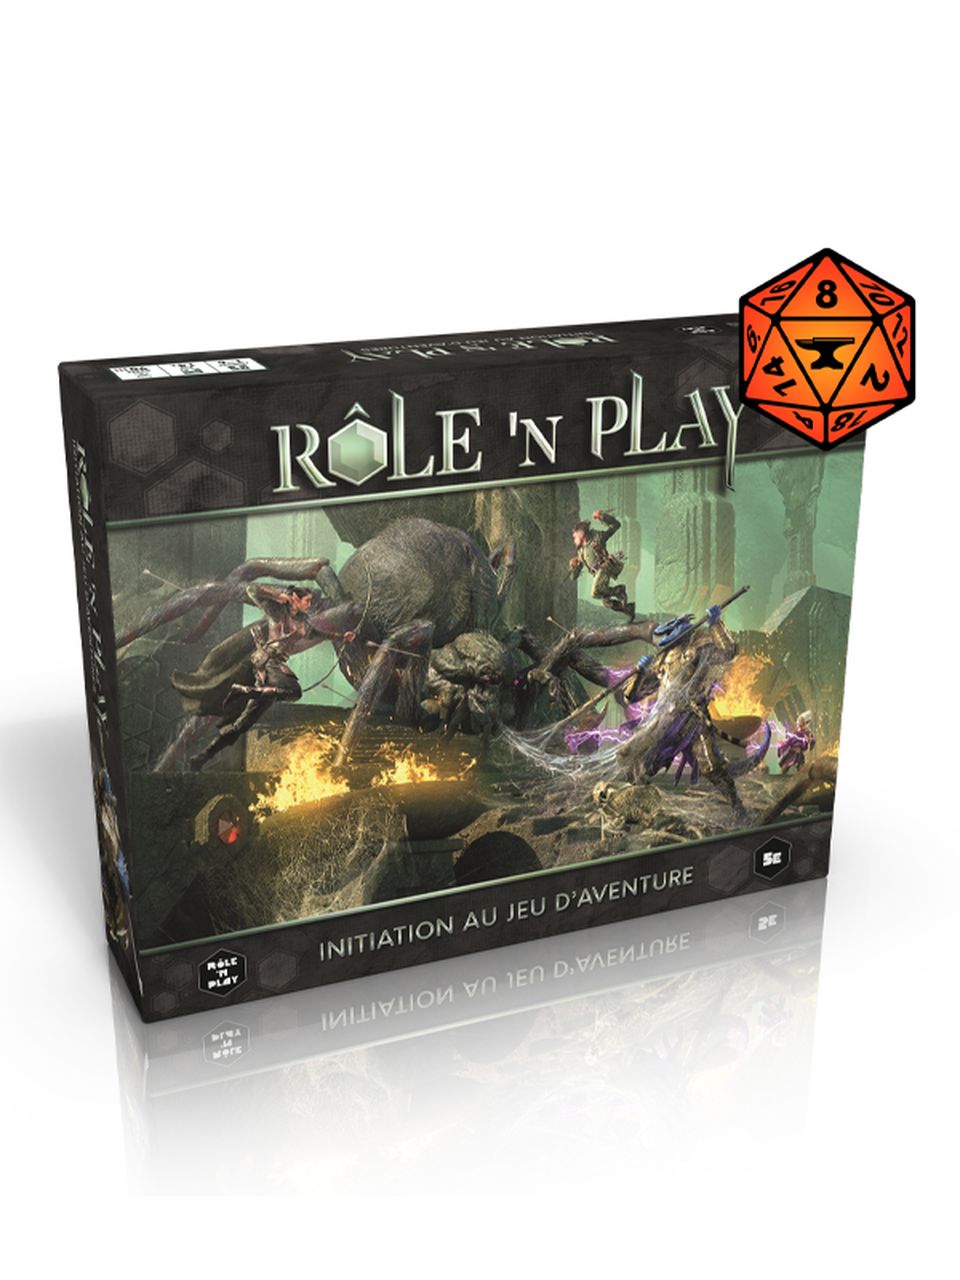 Role'n Play - Boîte d'initiation Role'n Play pour Foundry VTT image